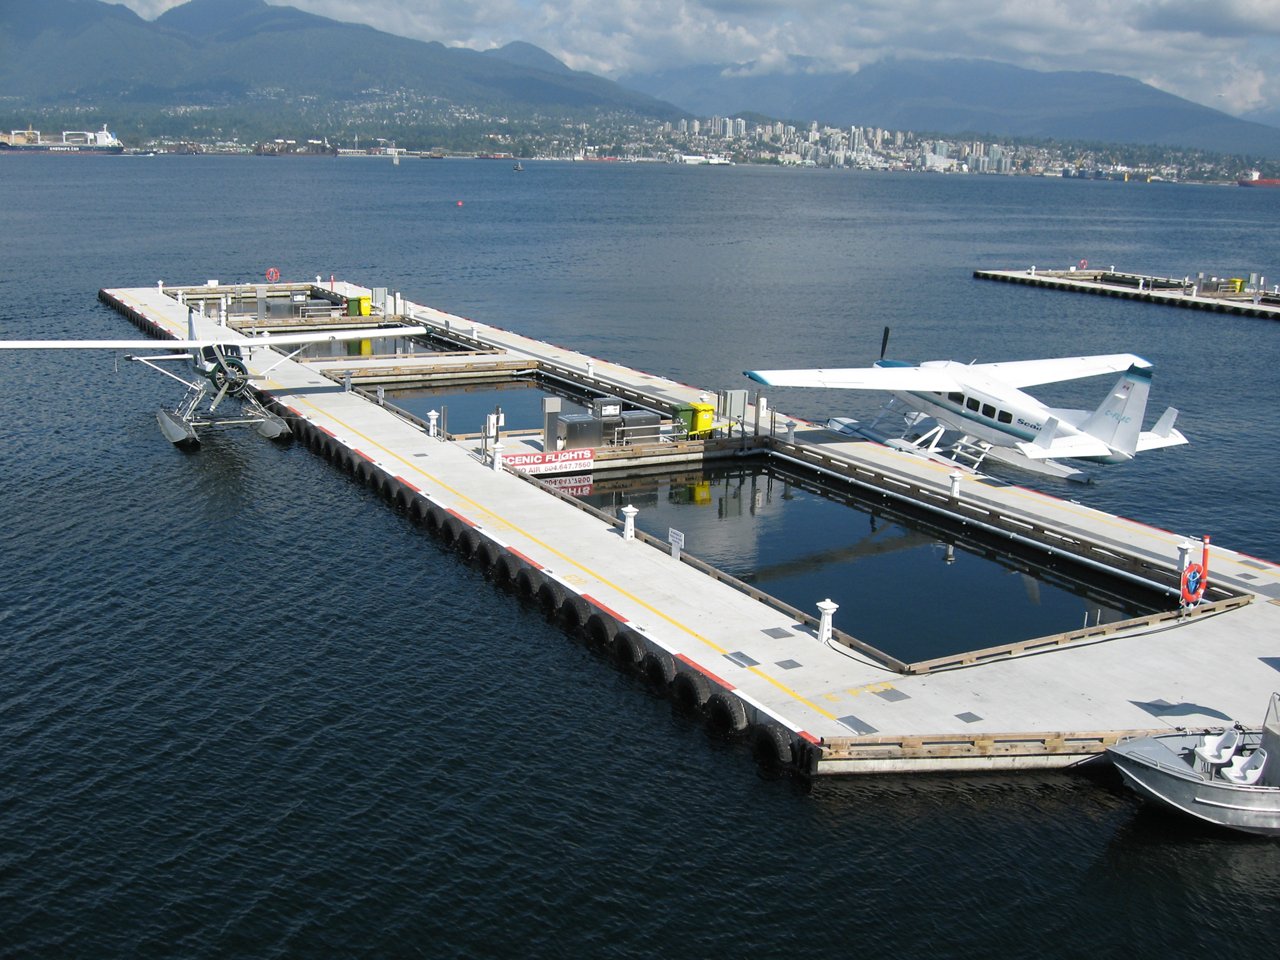 Exterior view of site with seaplanes.